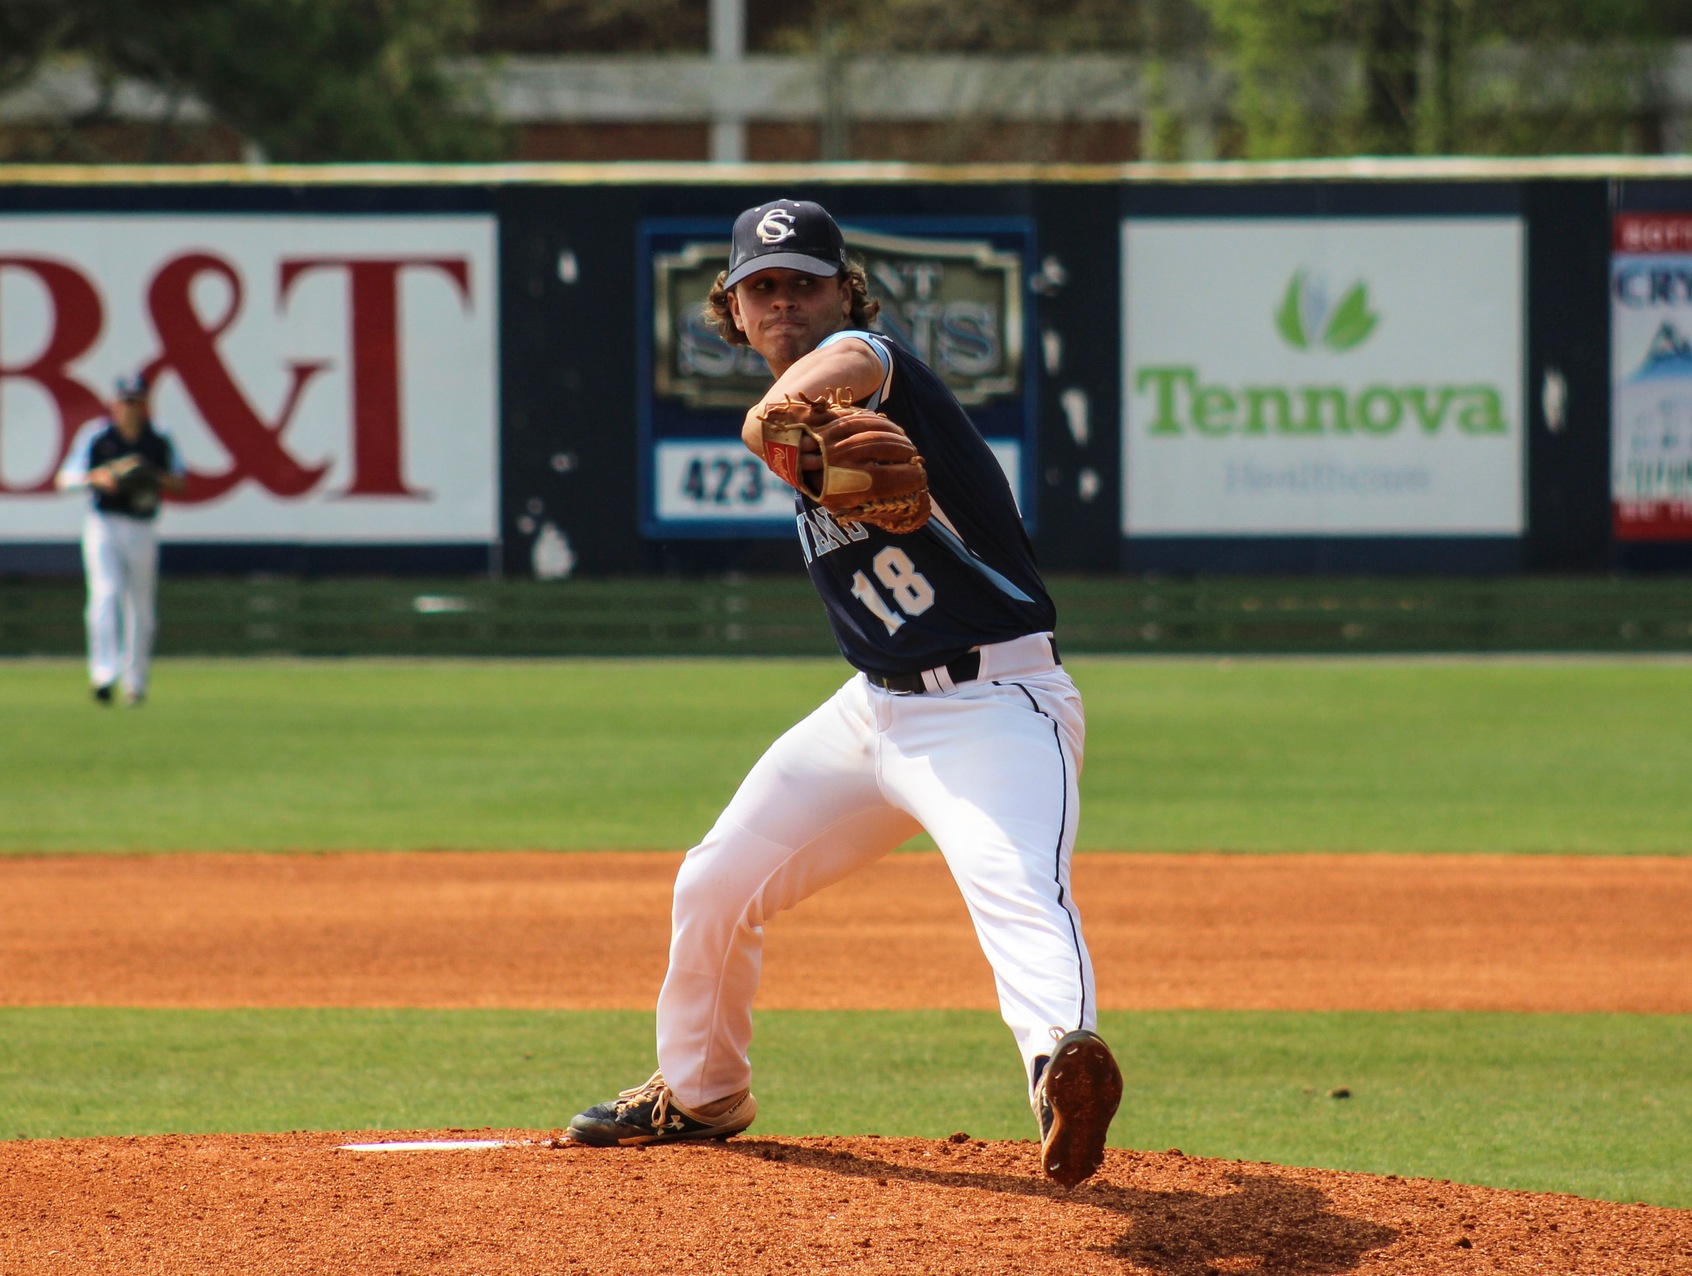 Hickman Named TCCAA Pitcher of the Week